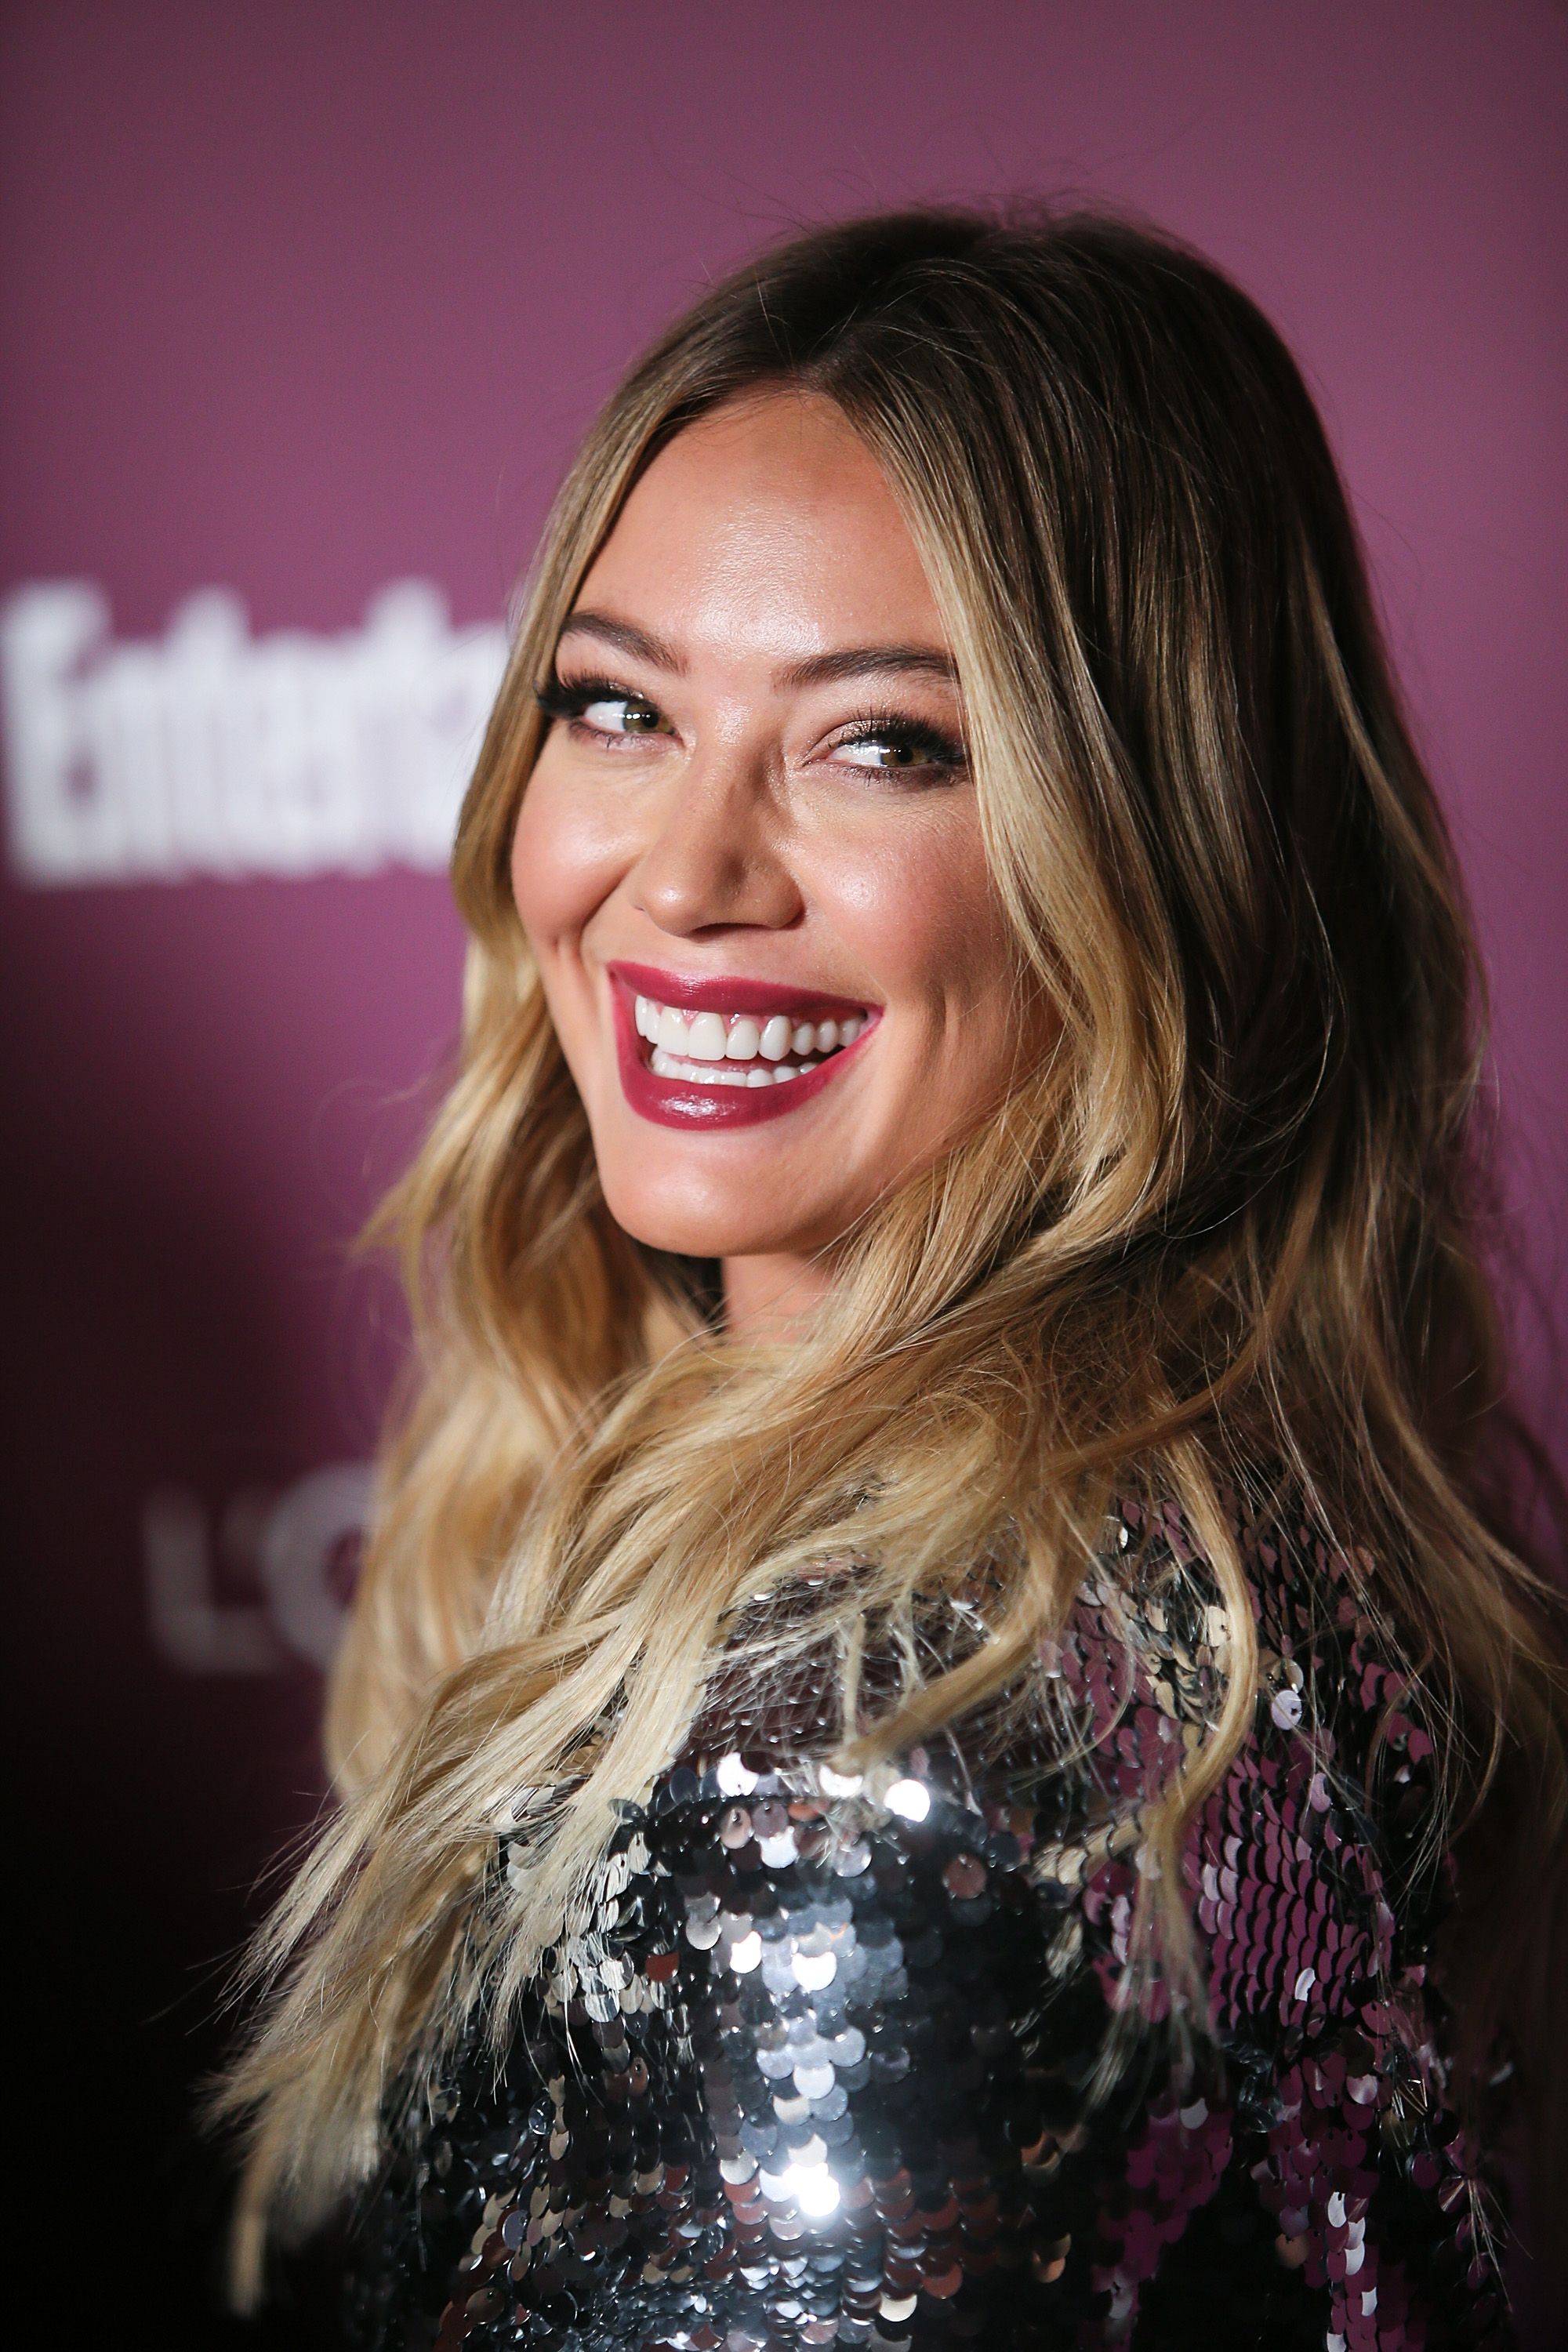 Hilary Duff at The Entertainment Weekly's 2017 Pre-Emmy Party at the Sunset Tower Hotel in West Hollywood, California | Photo: David Livingston/Getty Images